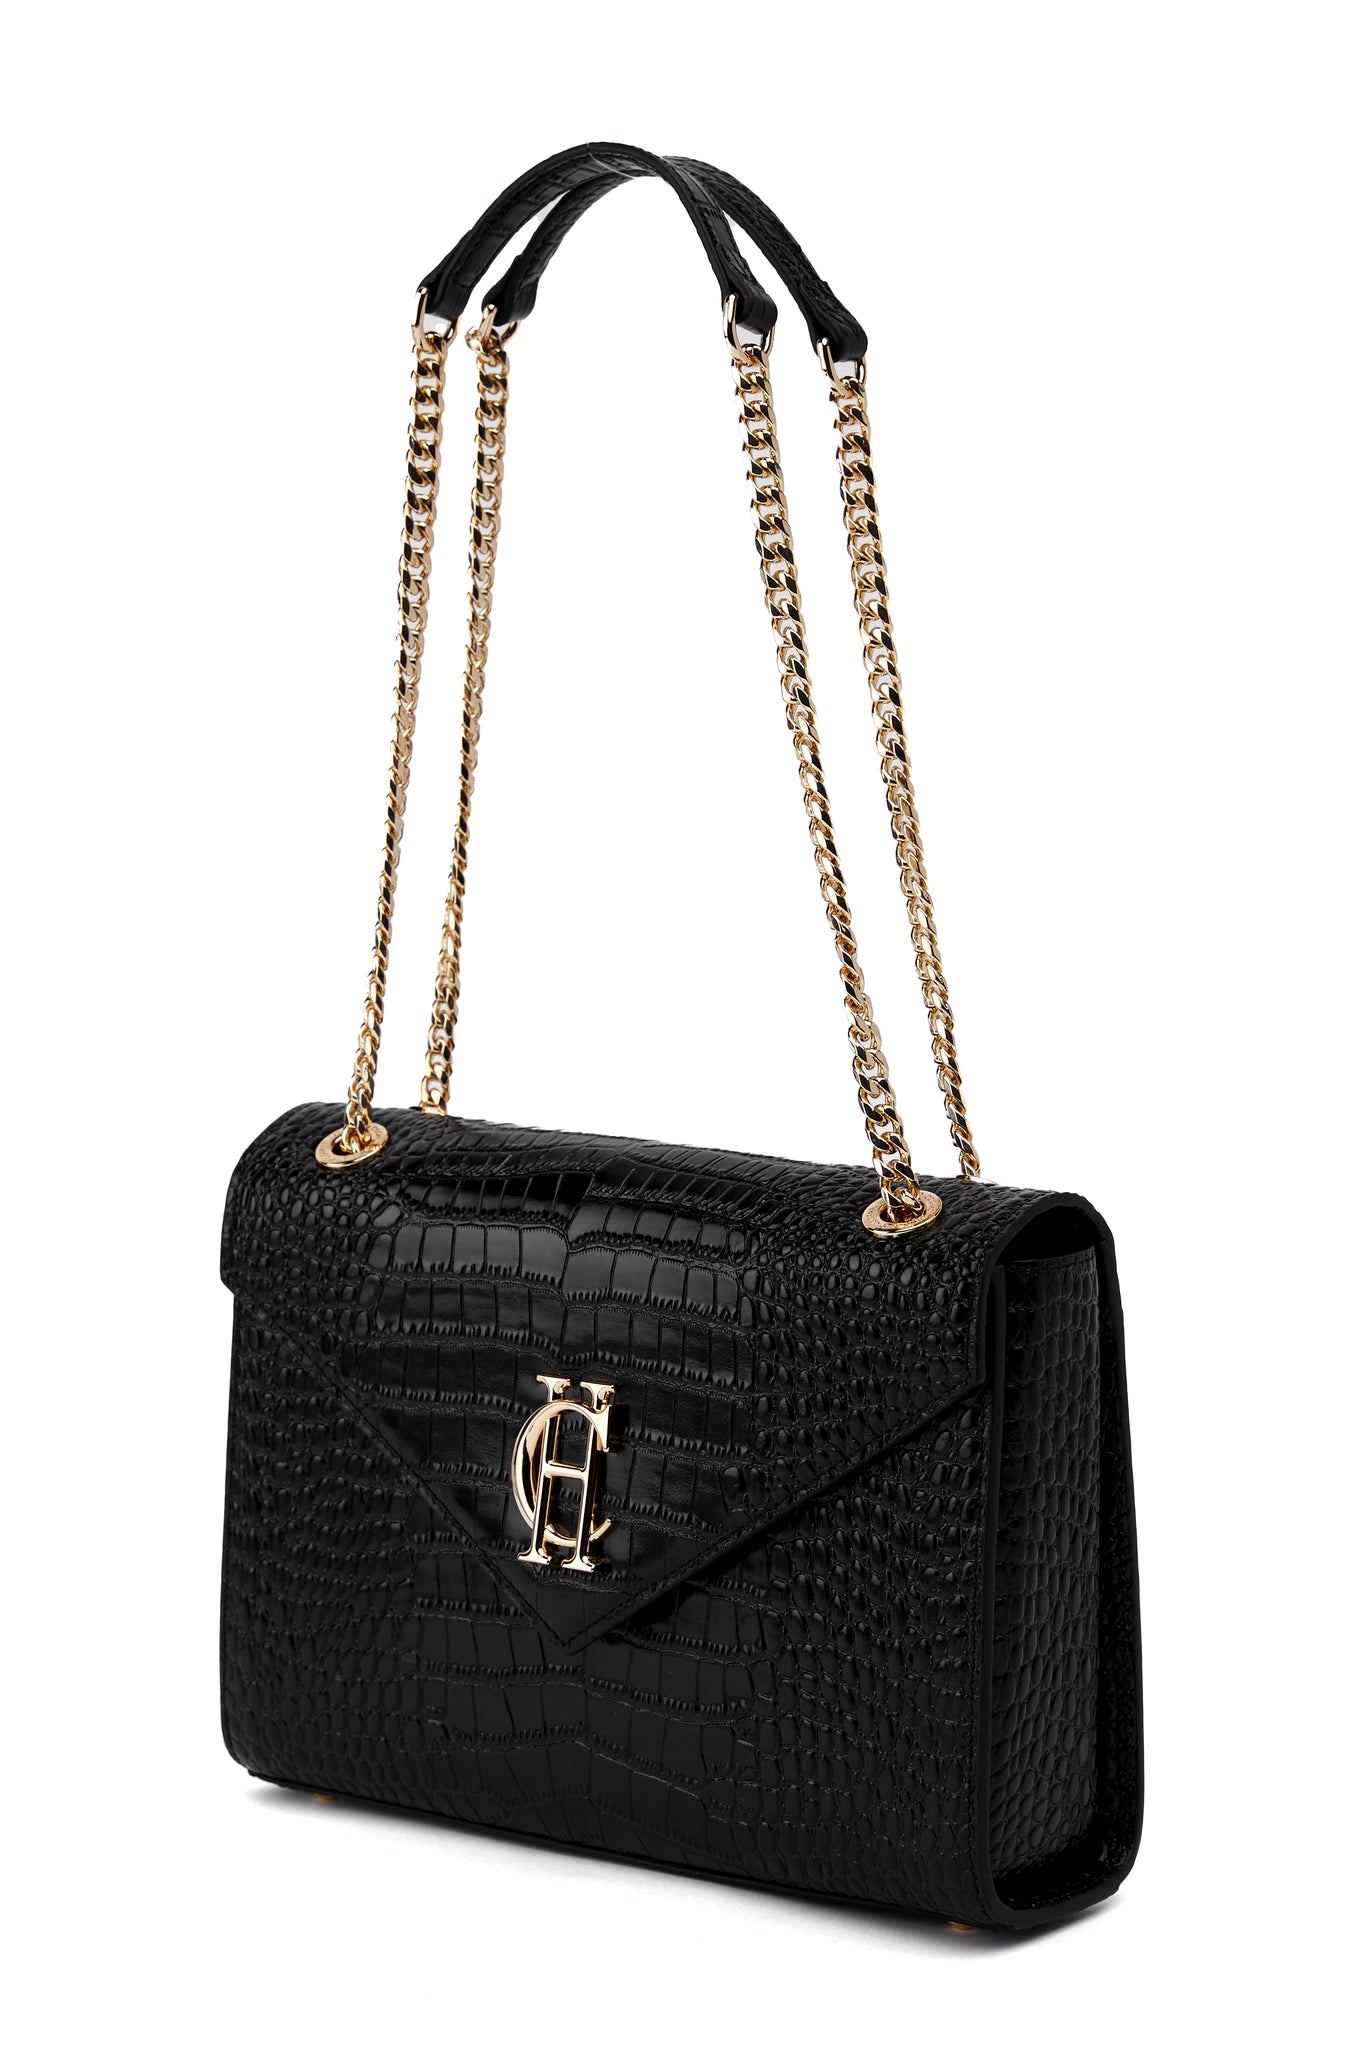 womens black croc embossed leather shoulder bag with gold hardware and chain